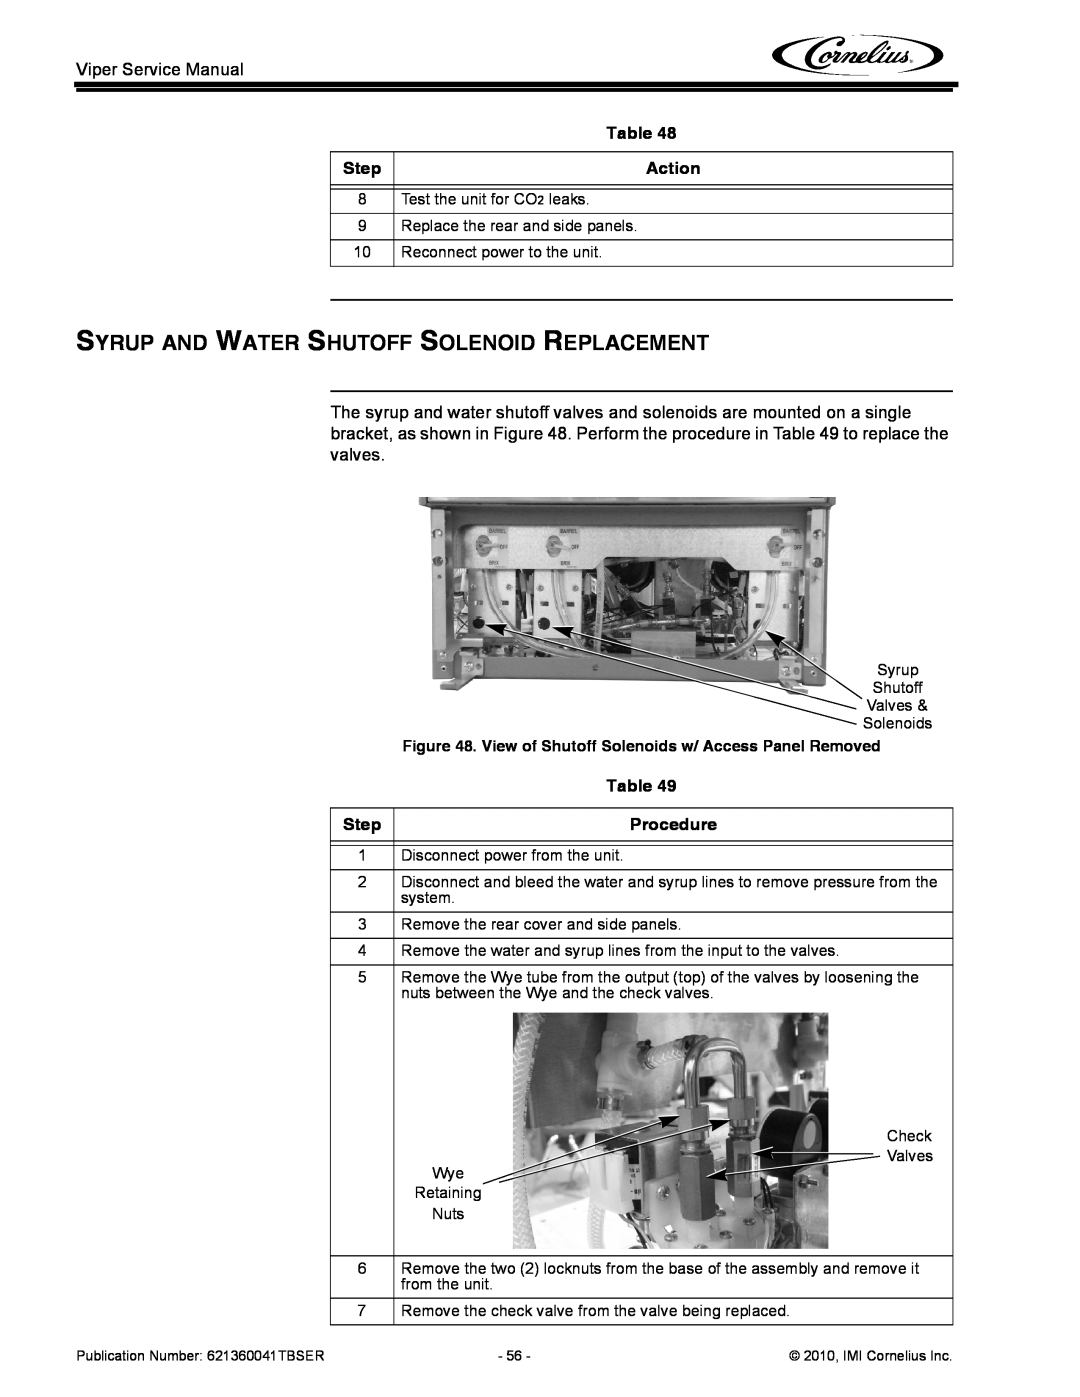 Cornelius 3 service manual Syrup And Water Shutoff Solenoid Replacement, Step, Action, Procedure 